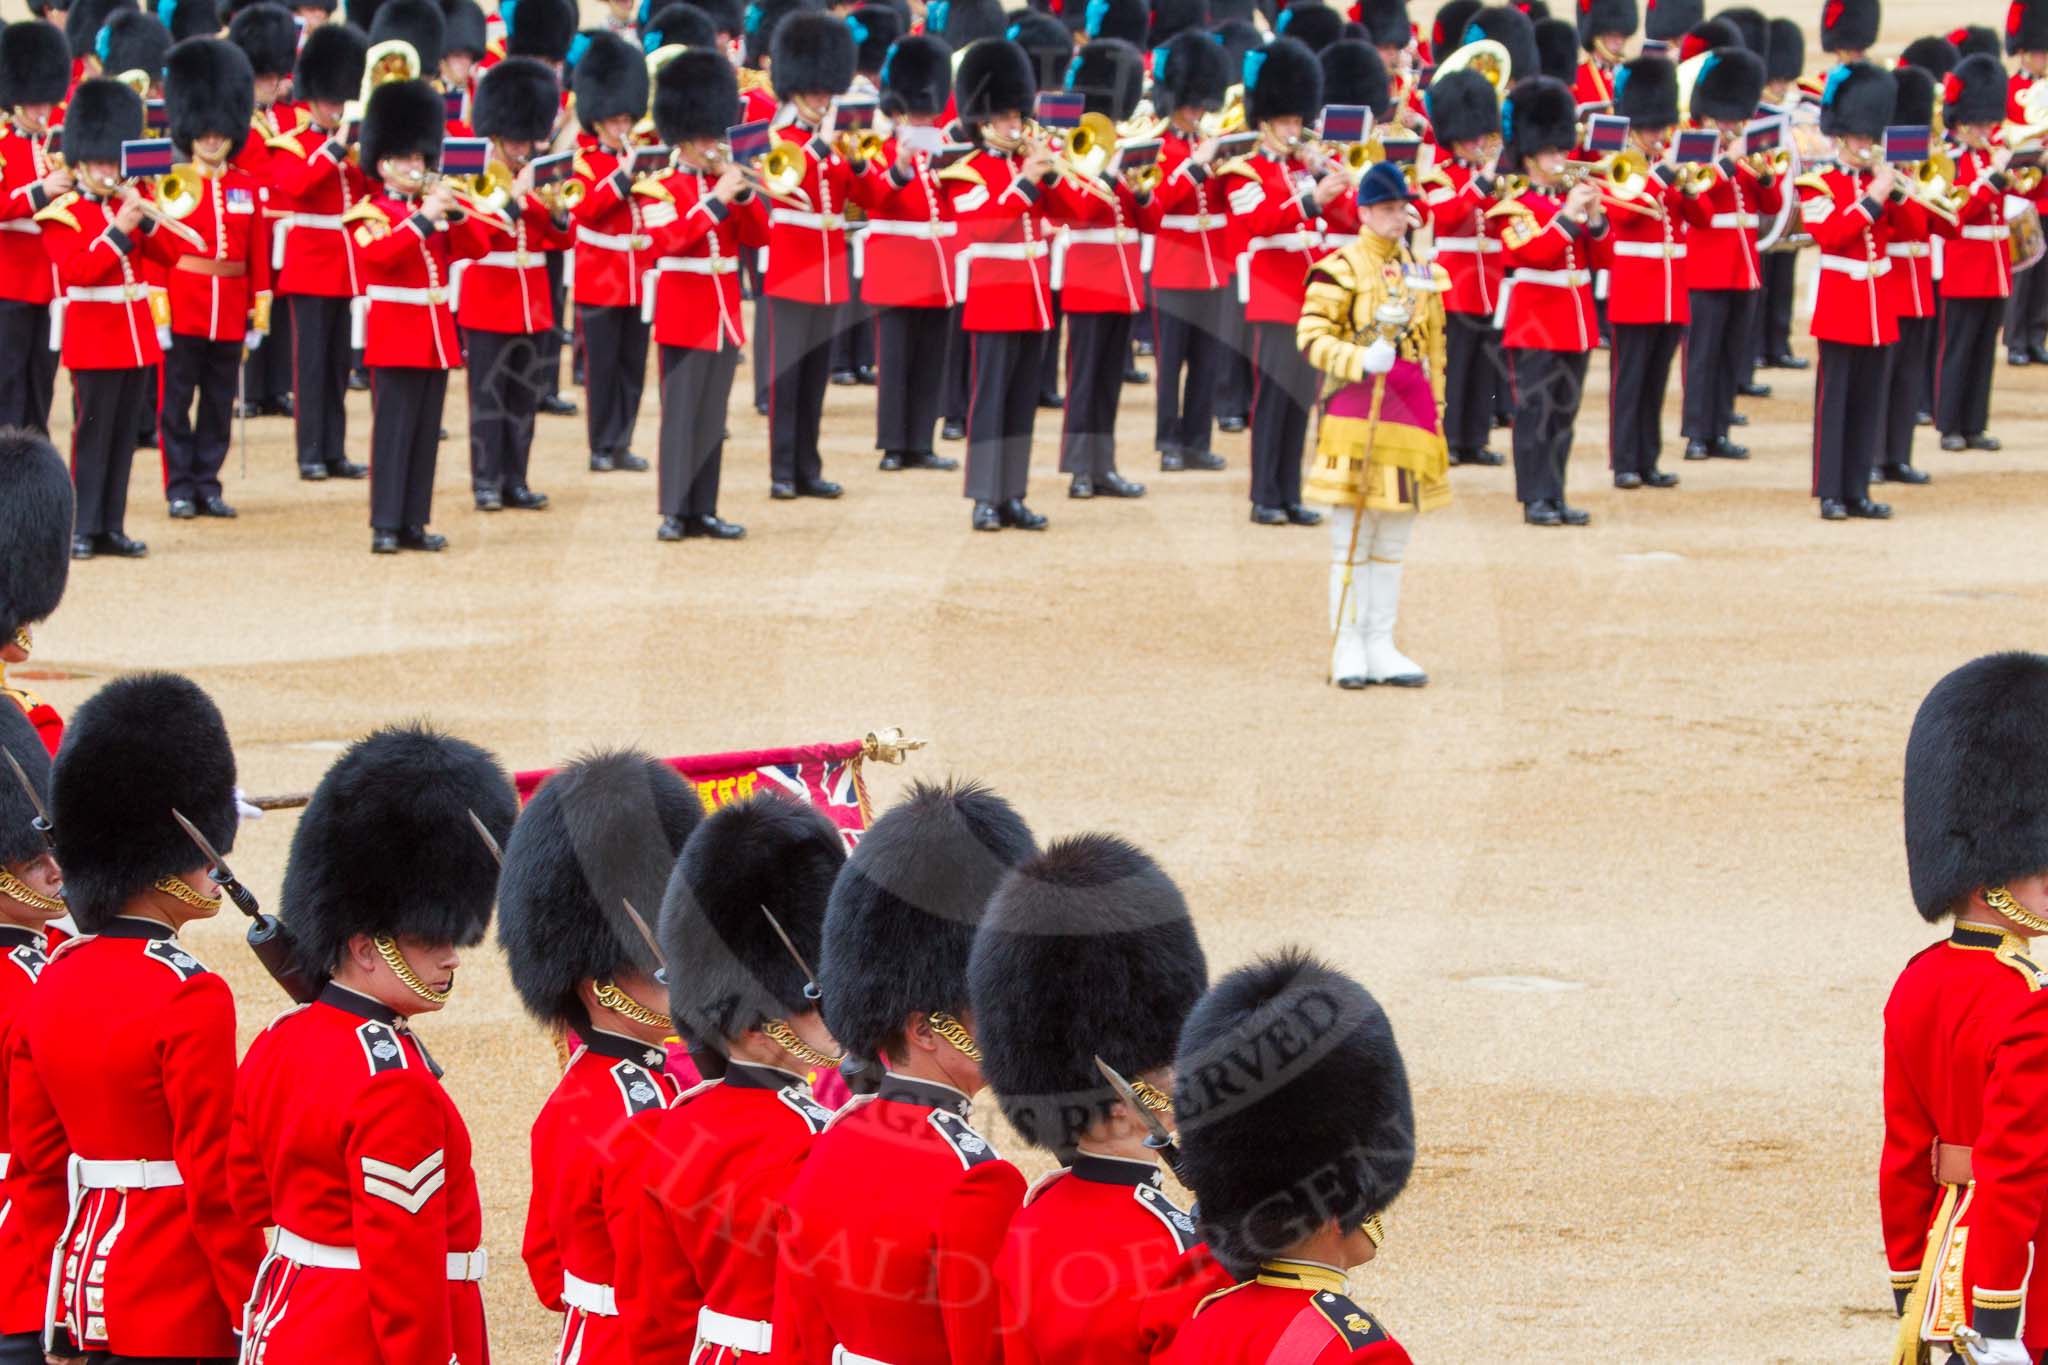 Trooping the Colour 2014.
Horse Guards Parade, Westminster,
London SW1A,

United Kingdom,
on 14 June 2014 at 11:37, image #631